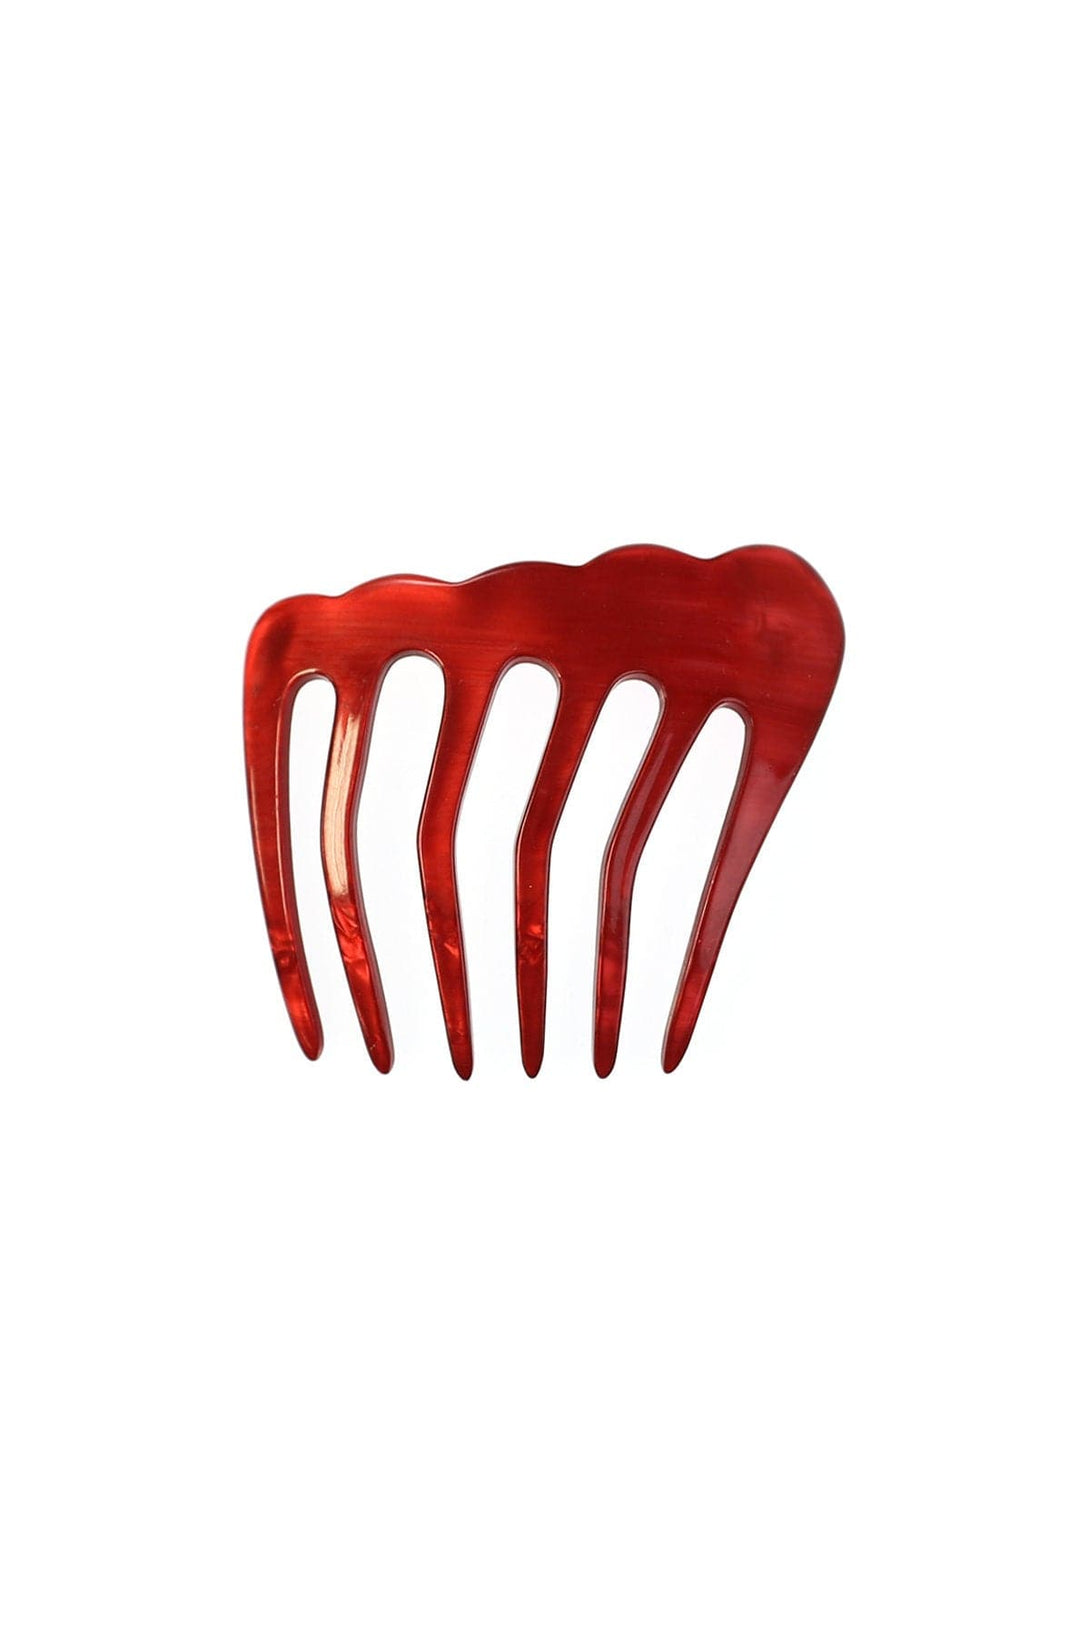 Vintage Acrylic "M" Shaped Wide Hair Comb